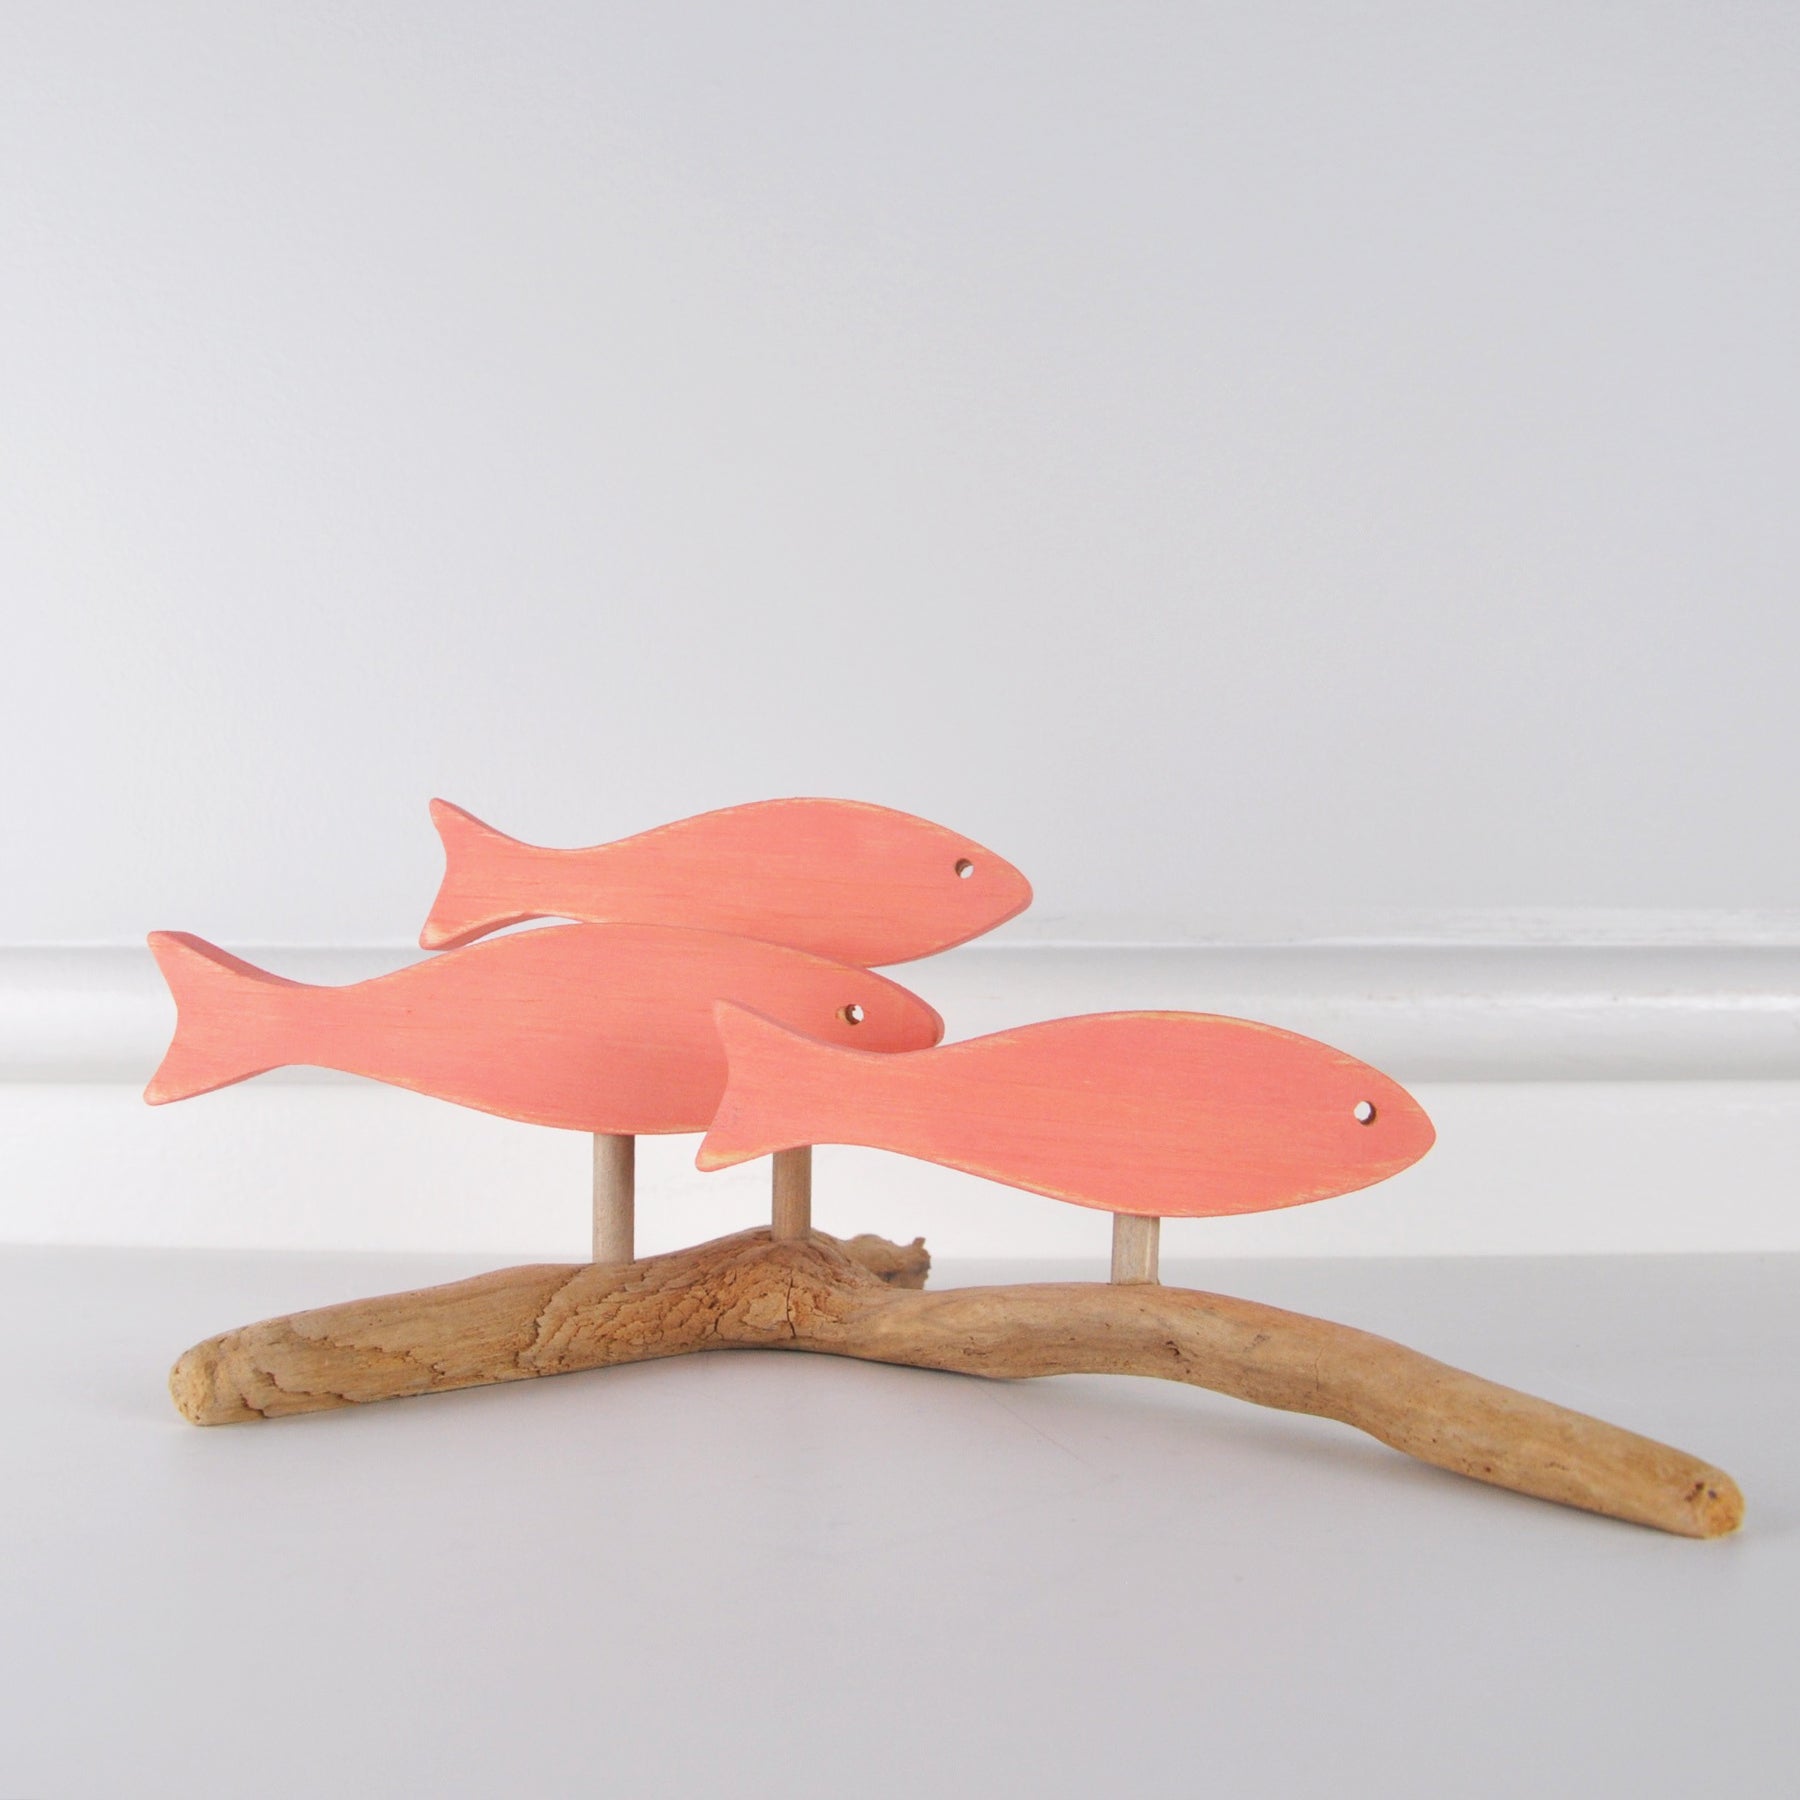 Jerry Walsh - 3 Fish Driftwood Sculpture - Coral